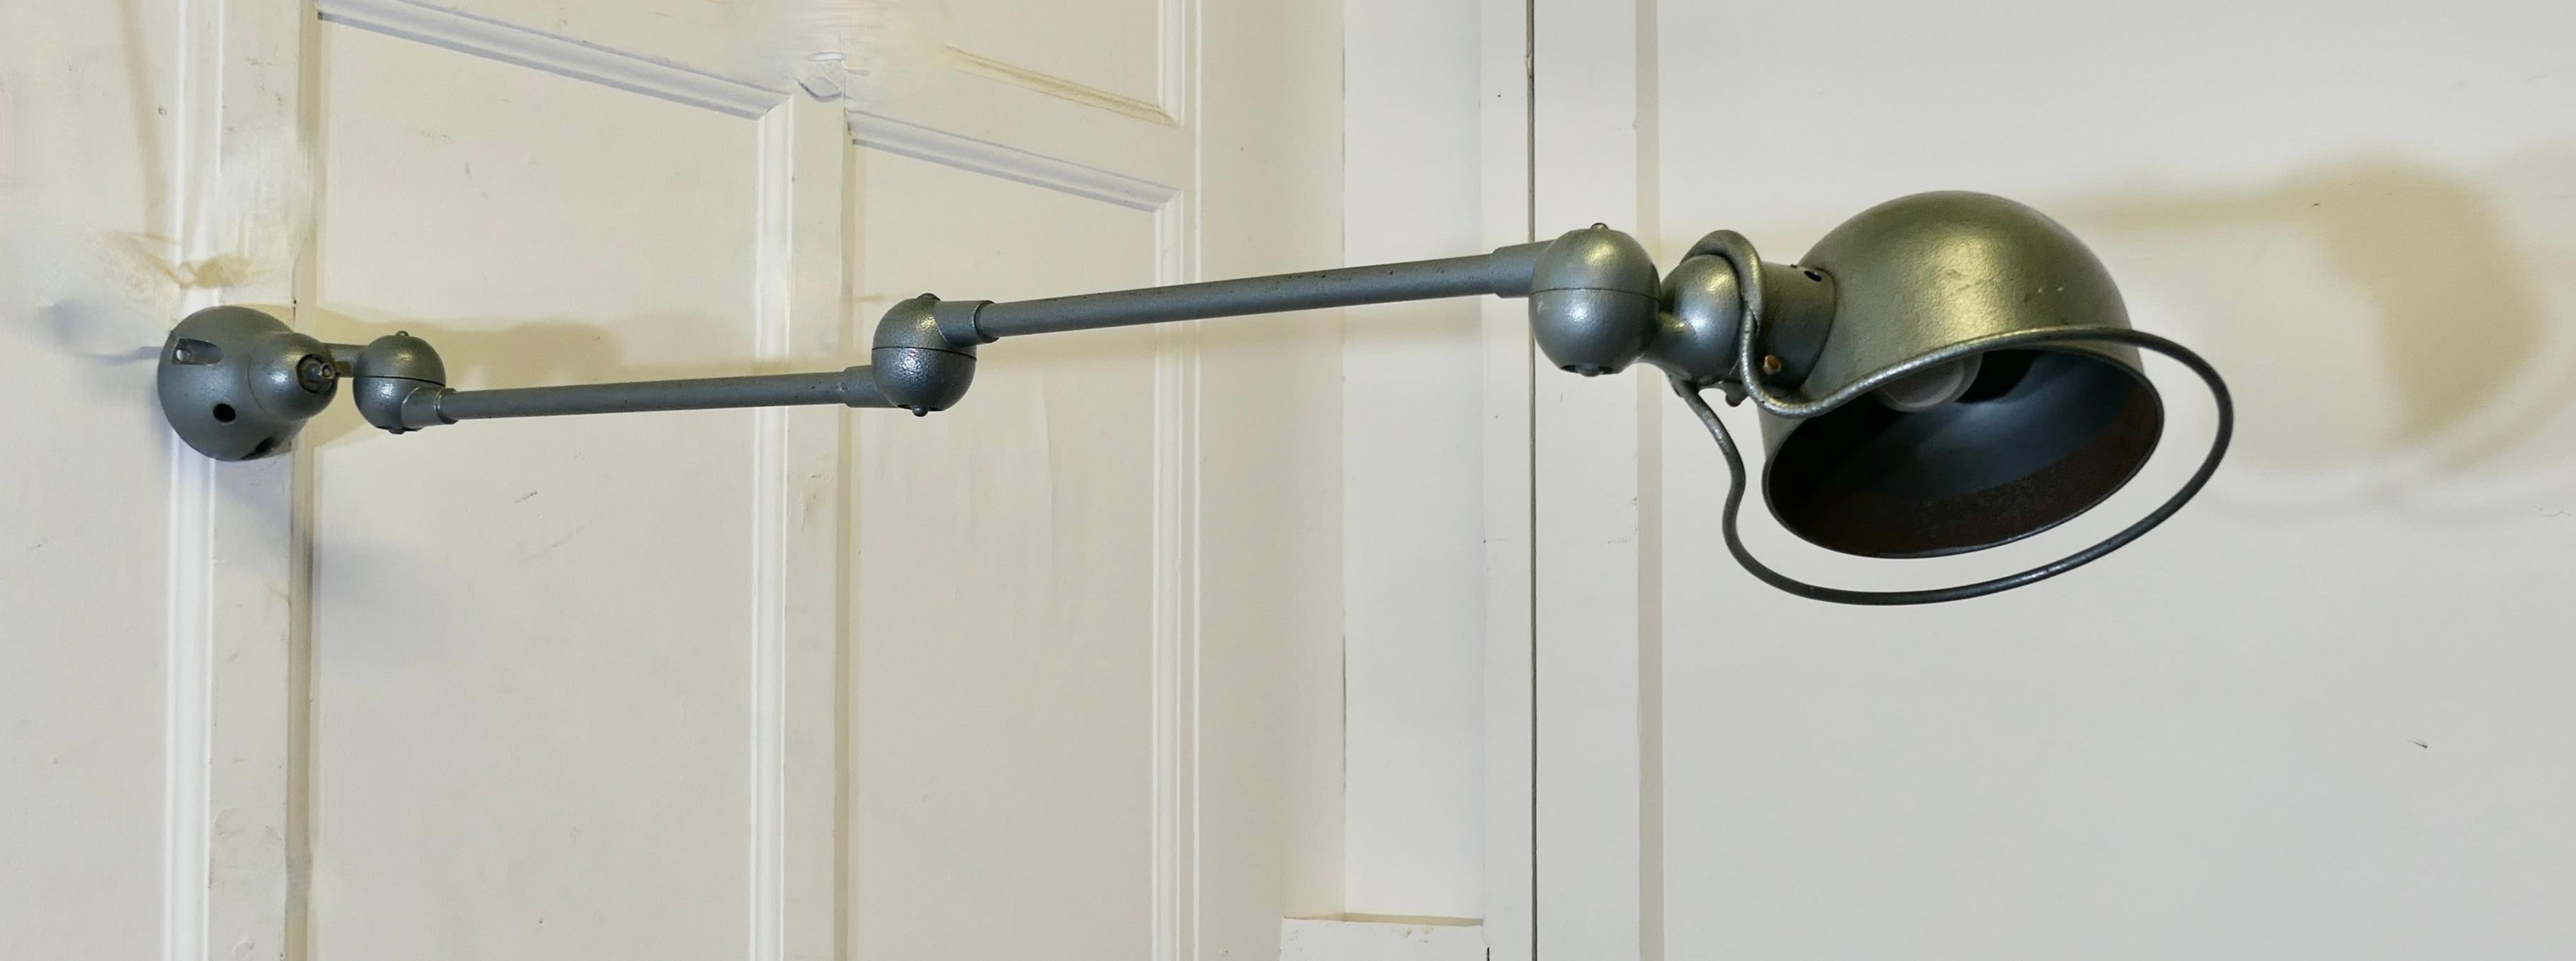 French Vintage Industrial Articulated Wall Light Sconce    For Sale 3